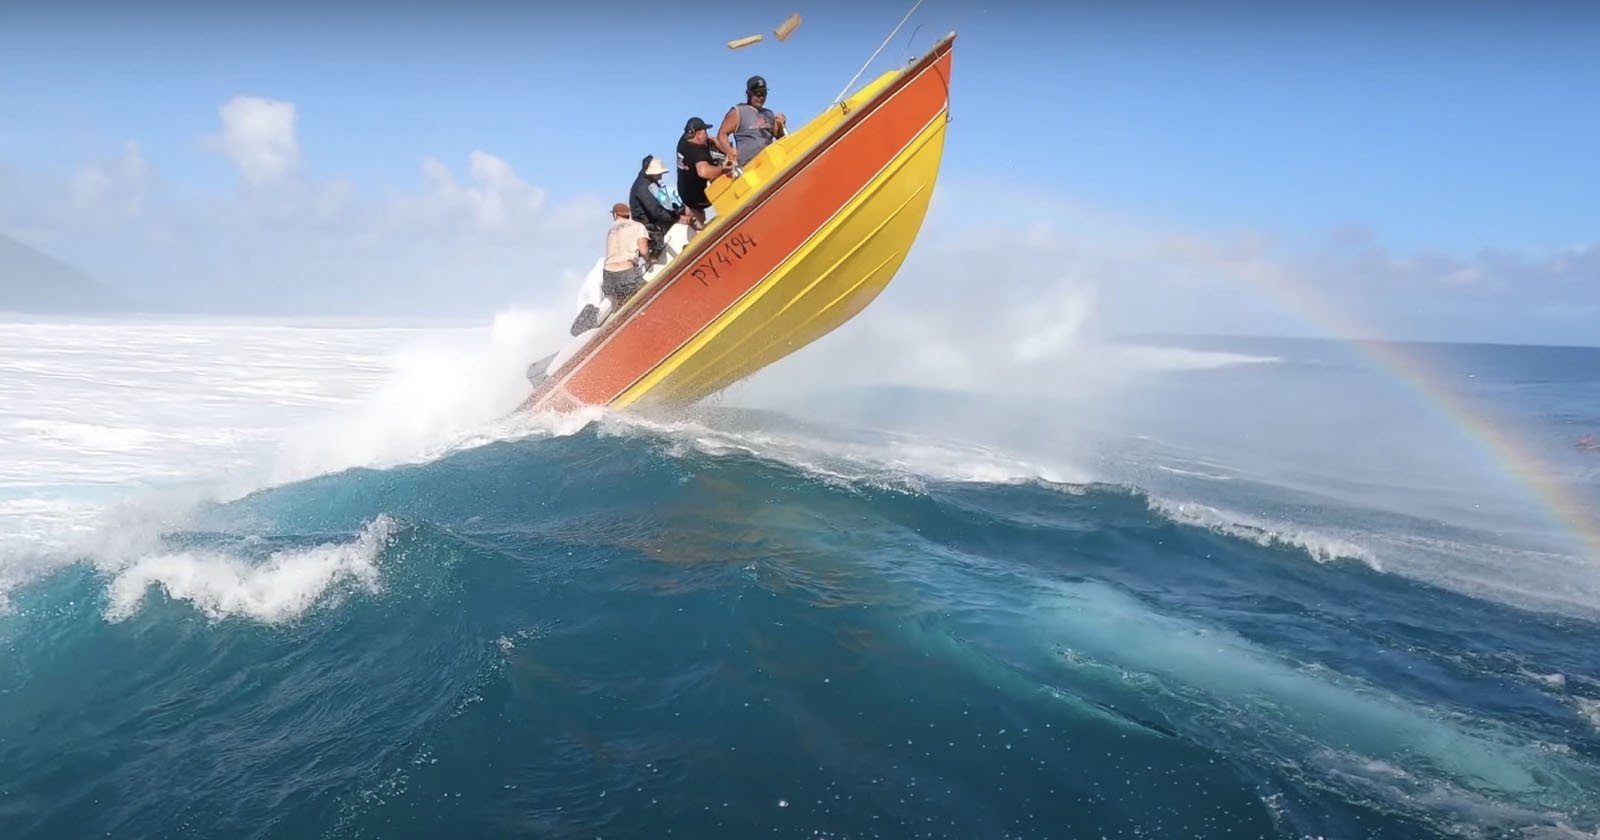 Video Shows Two Photographers Thrown Airborne by a Giant Wave